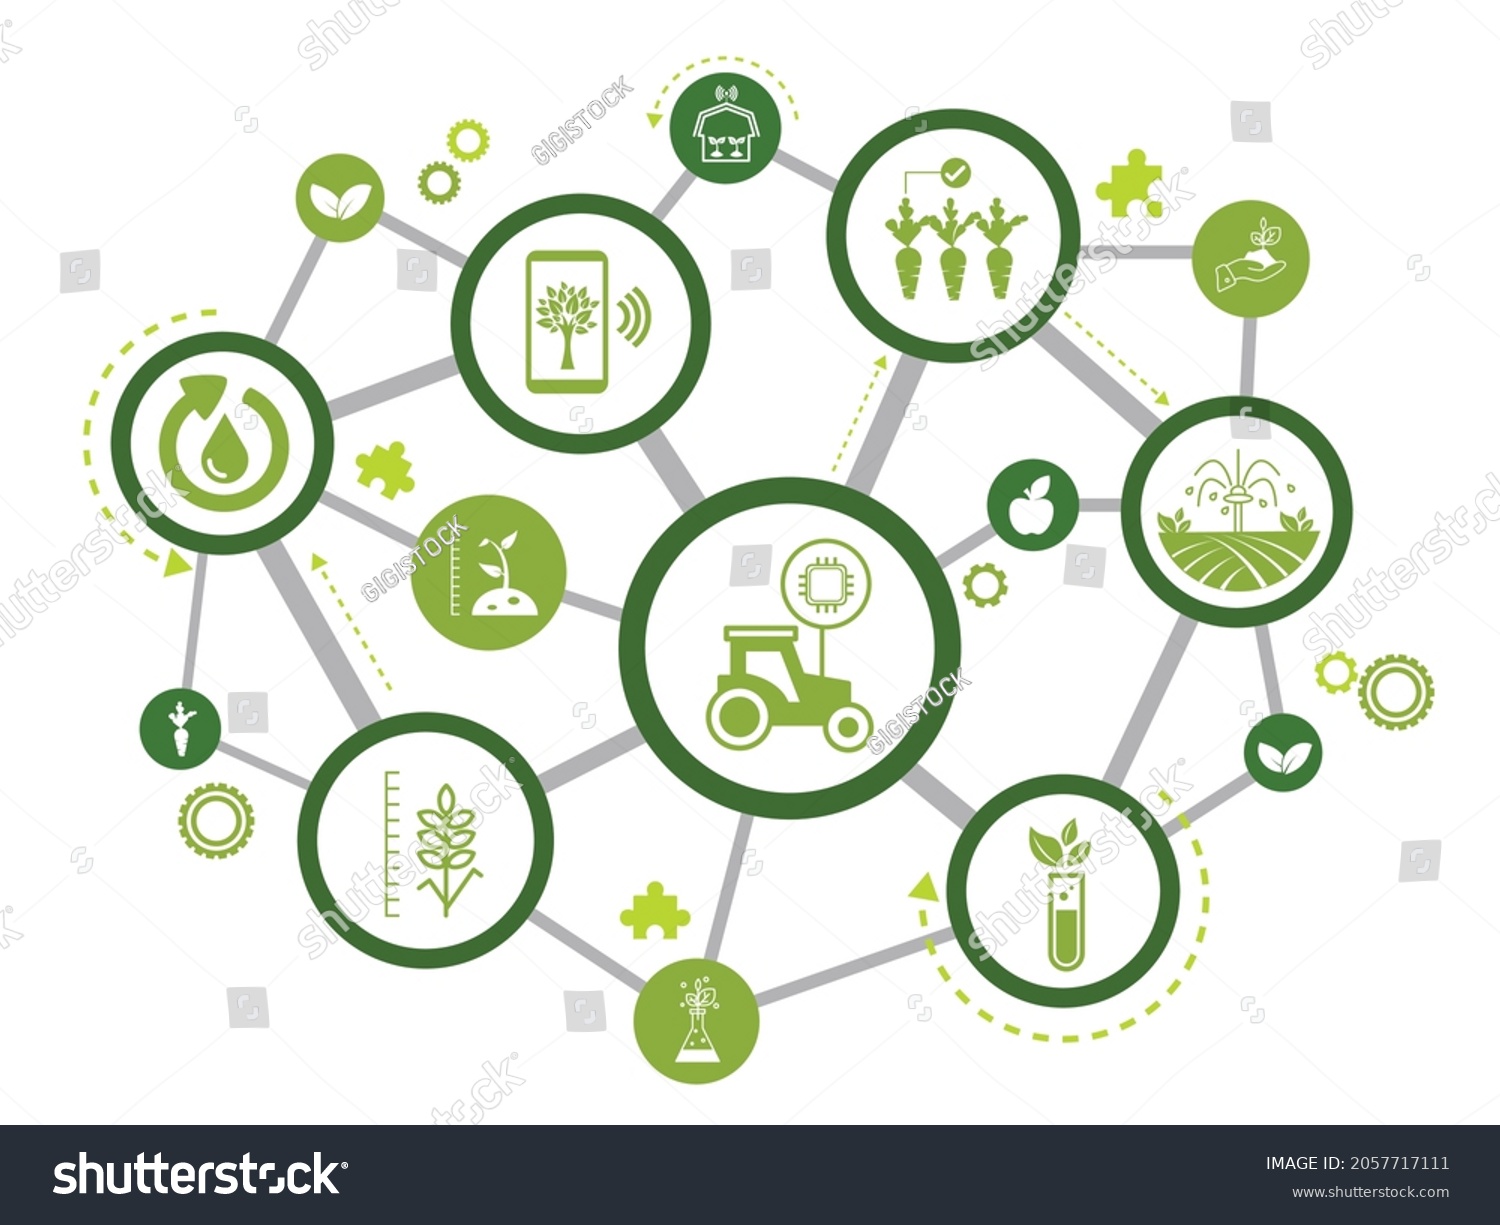 smart farm or agritech vector illustration. Banner with connected icons related to smart agriculture technology, digital iot farming methods and farm automation.  #2057717111